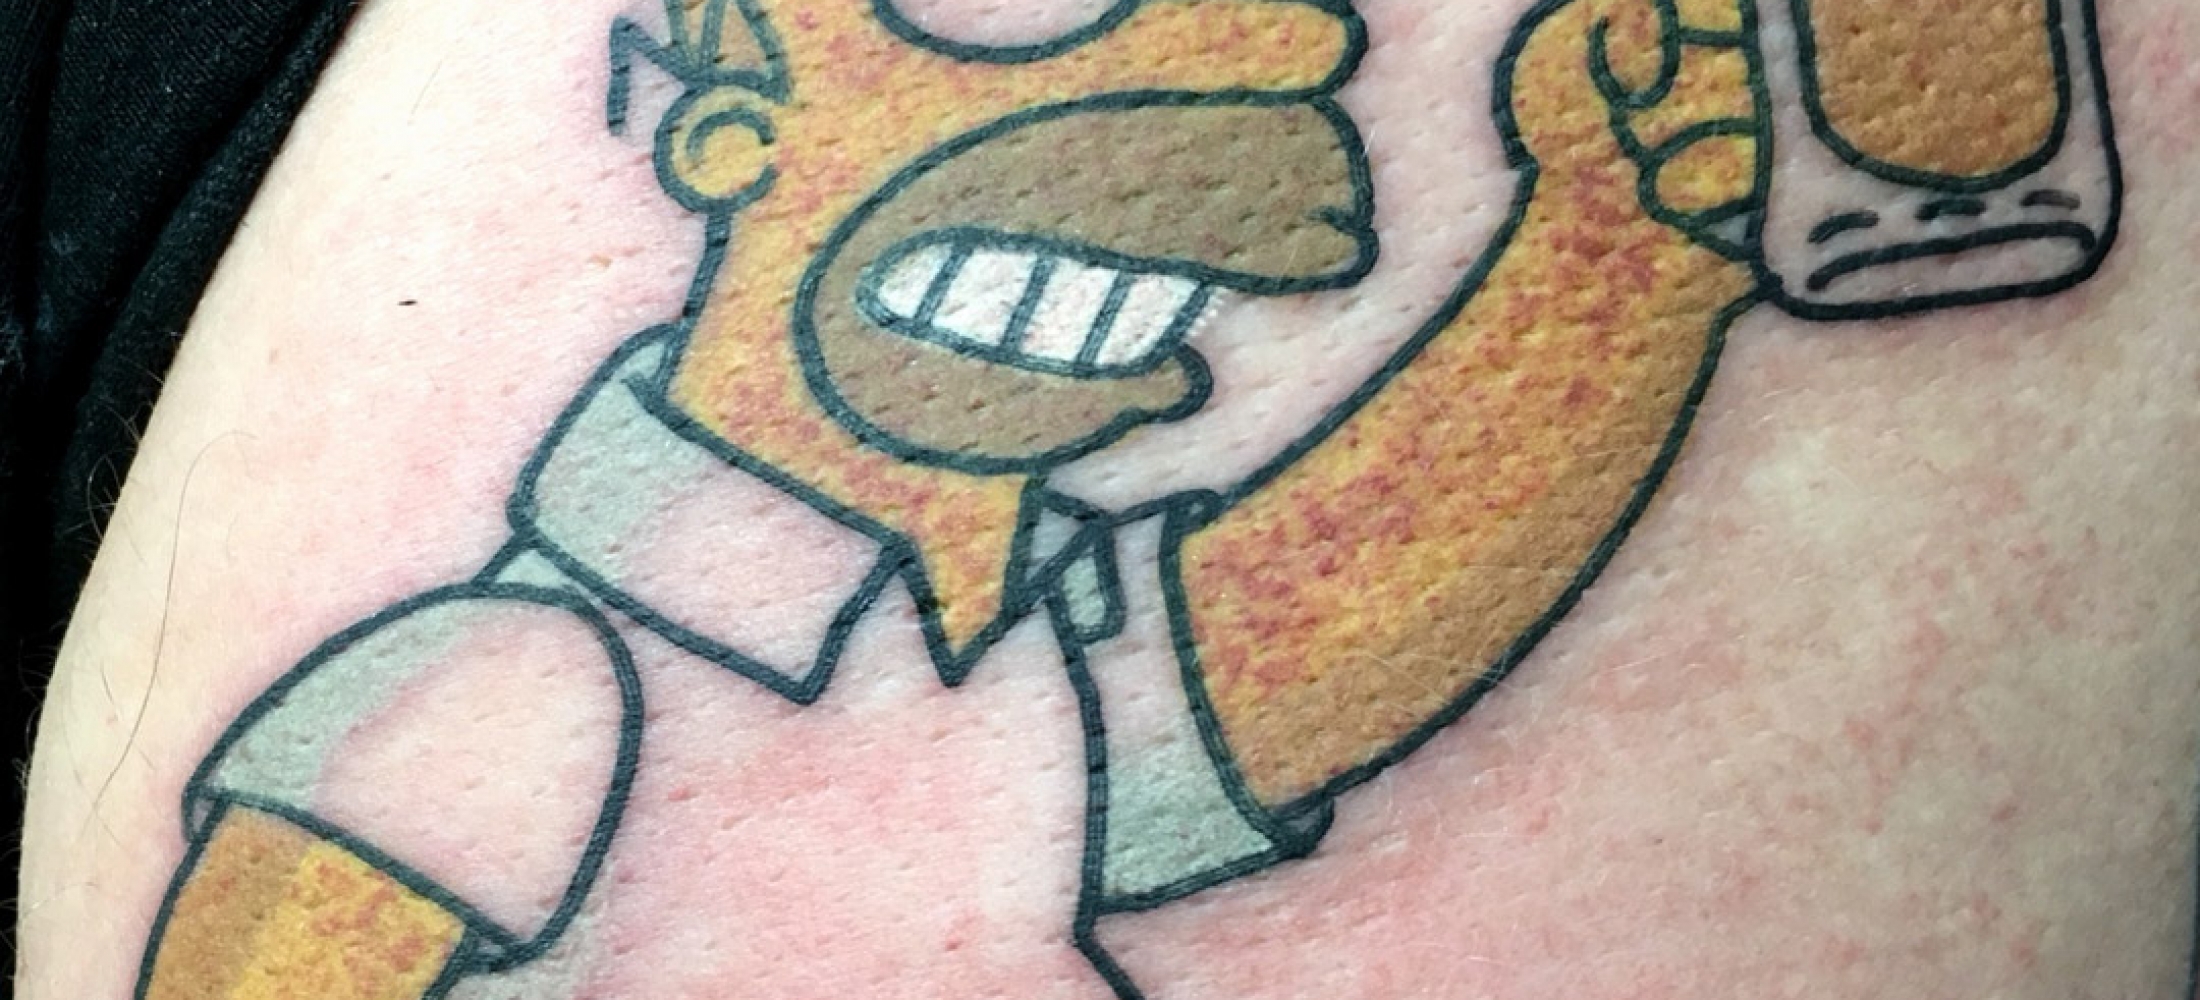 Homer Simpson by Roger Bunker Tattoo Quality tattoos